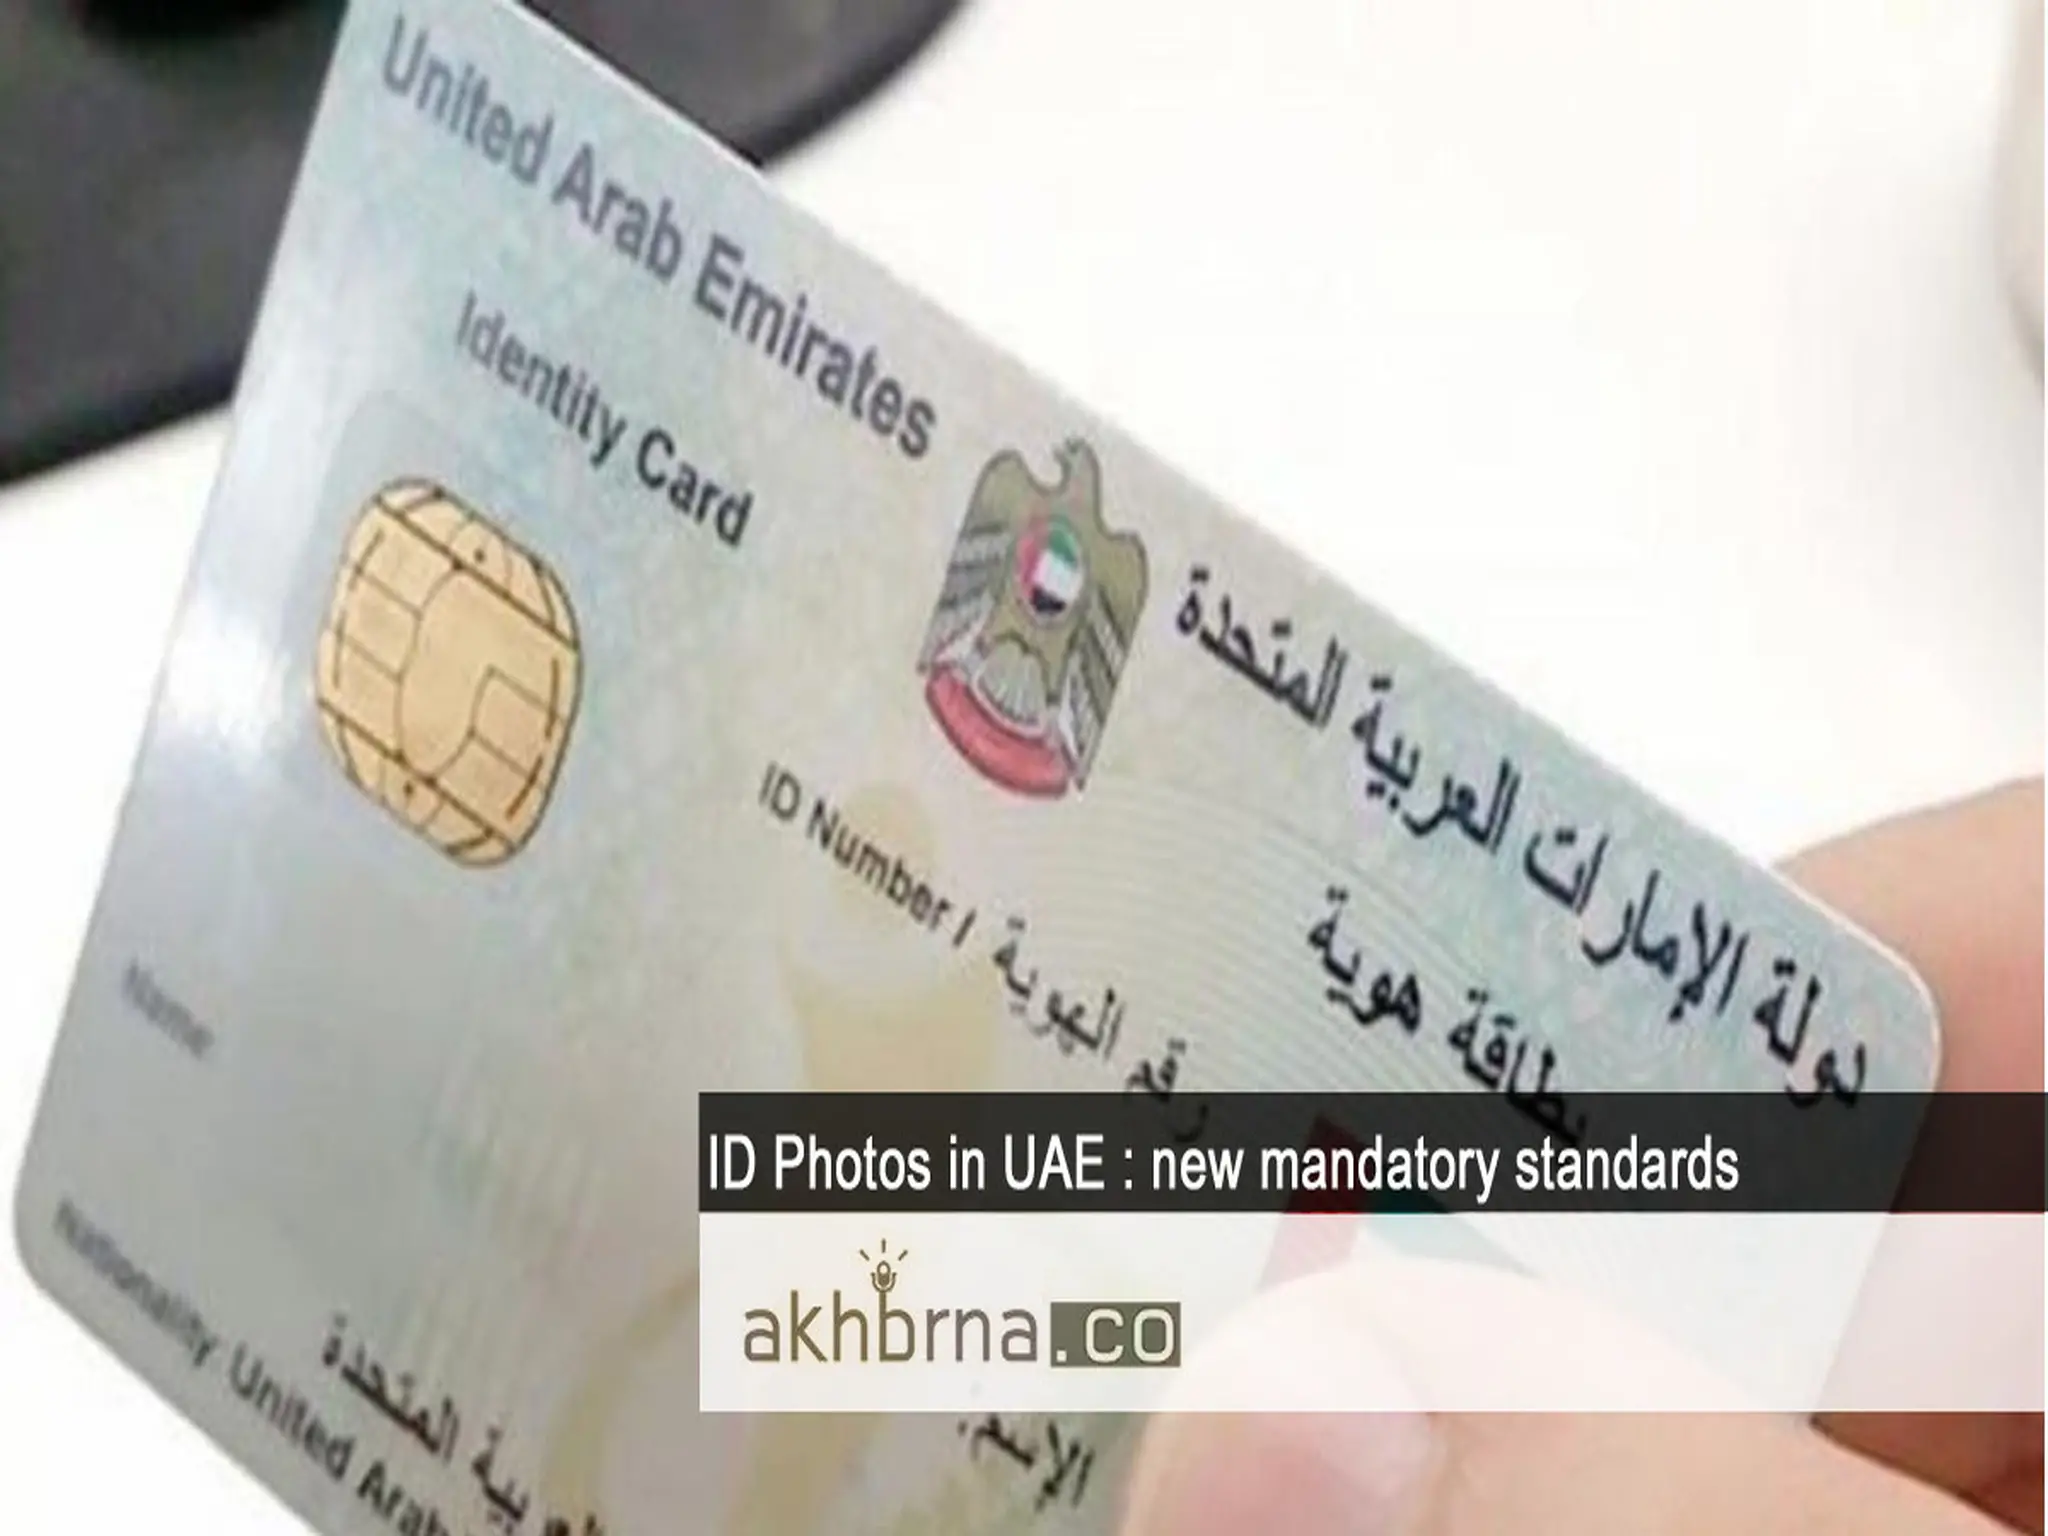 Emirates IDs : What you need to know about new mandatory standards taking pictures 